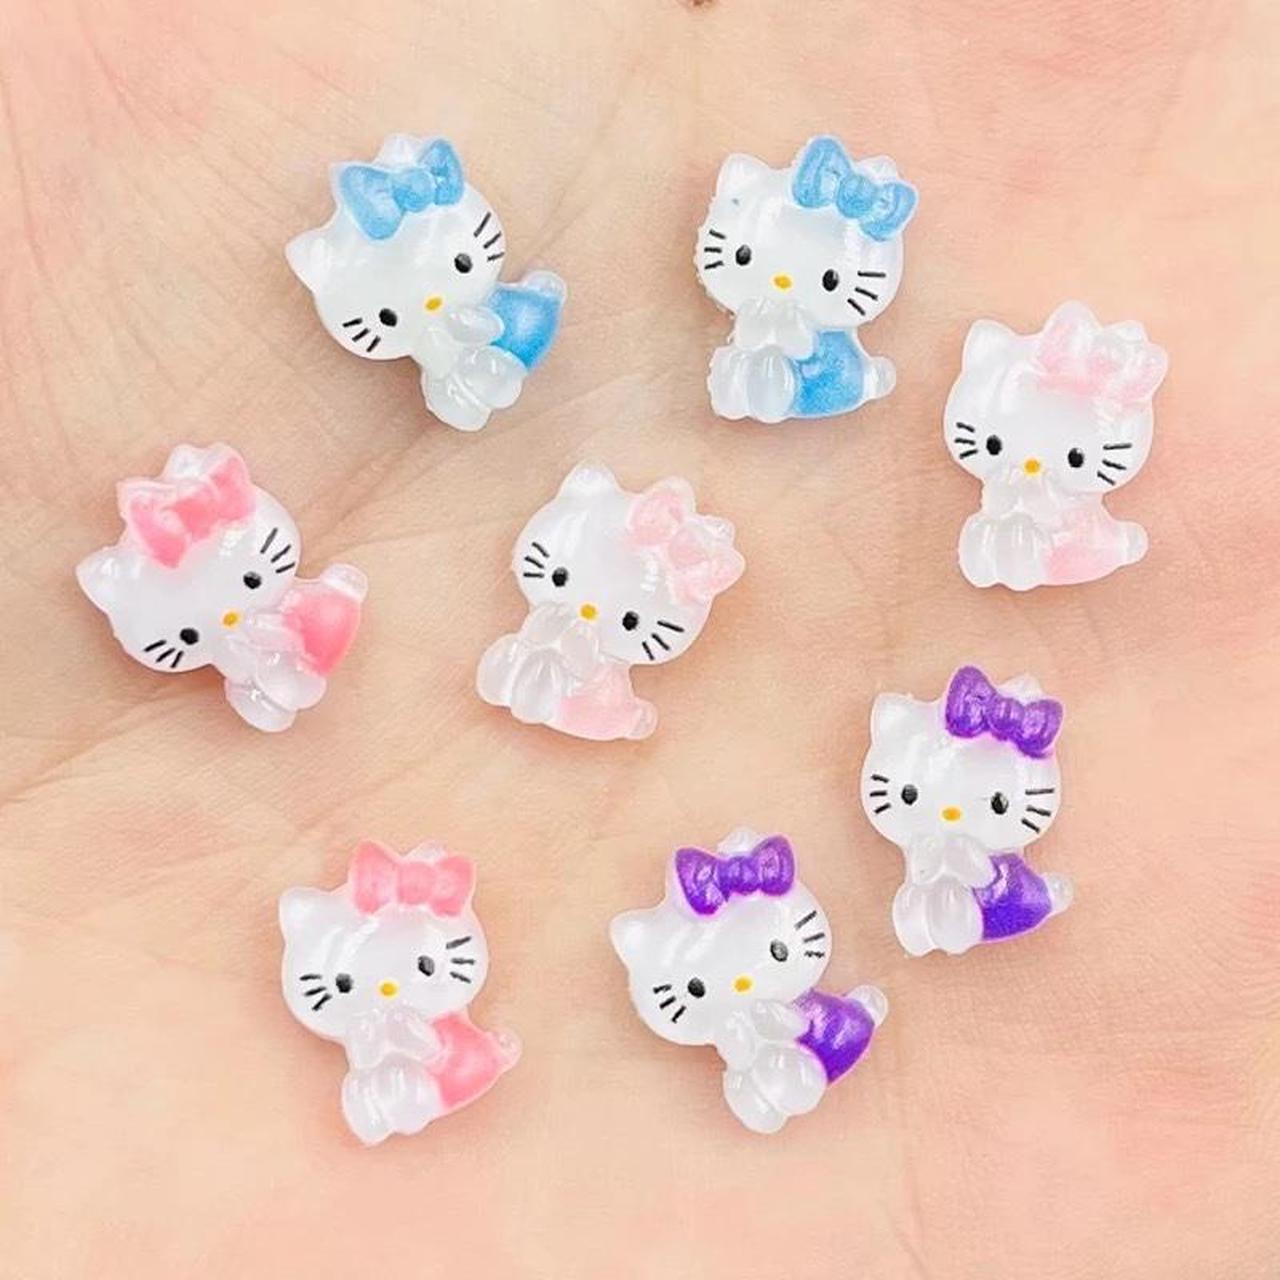 The hello kitty charms are too cute 🥹🎀 #nailcharmhaul